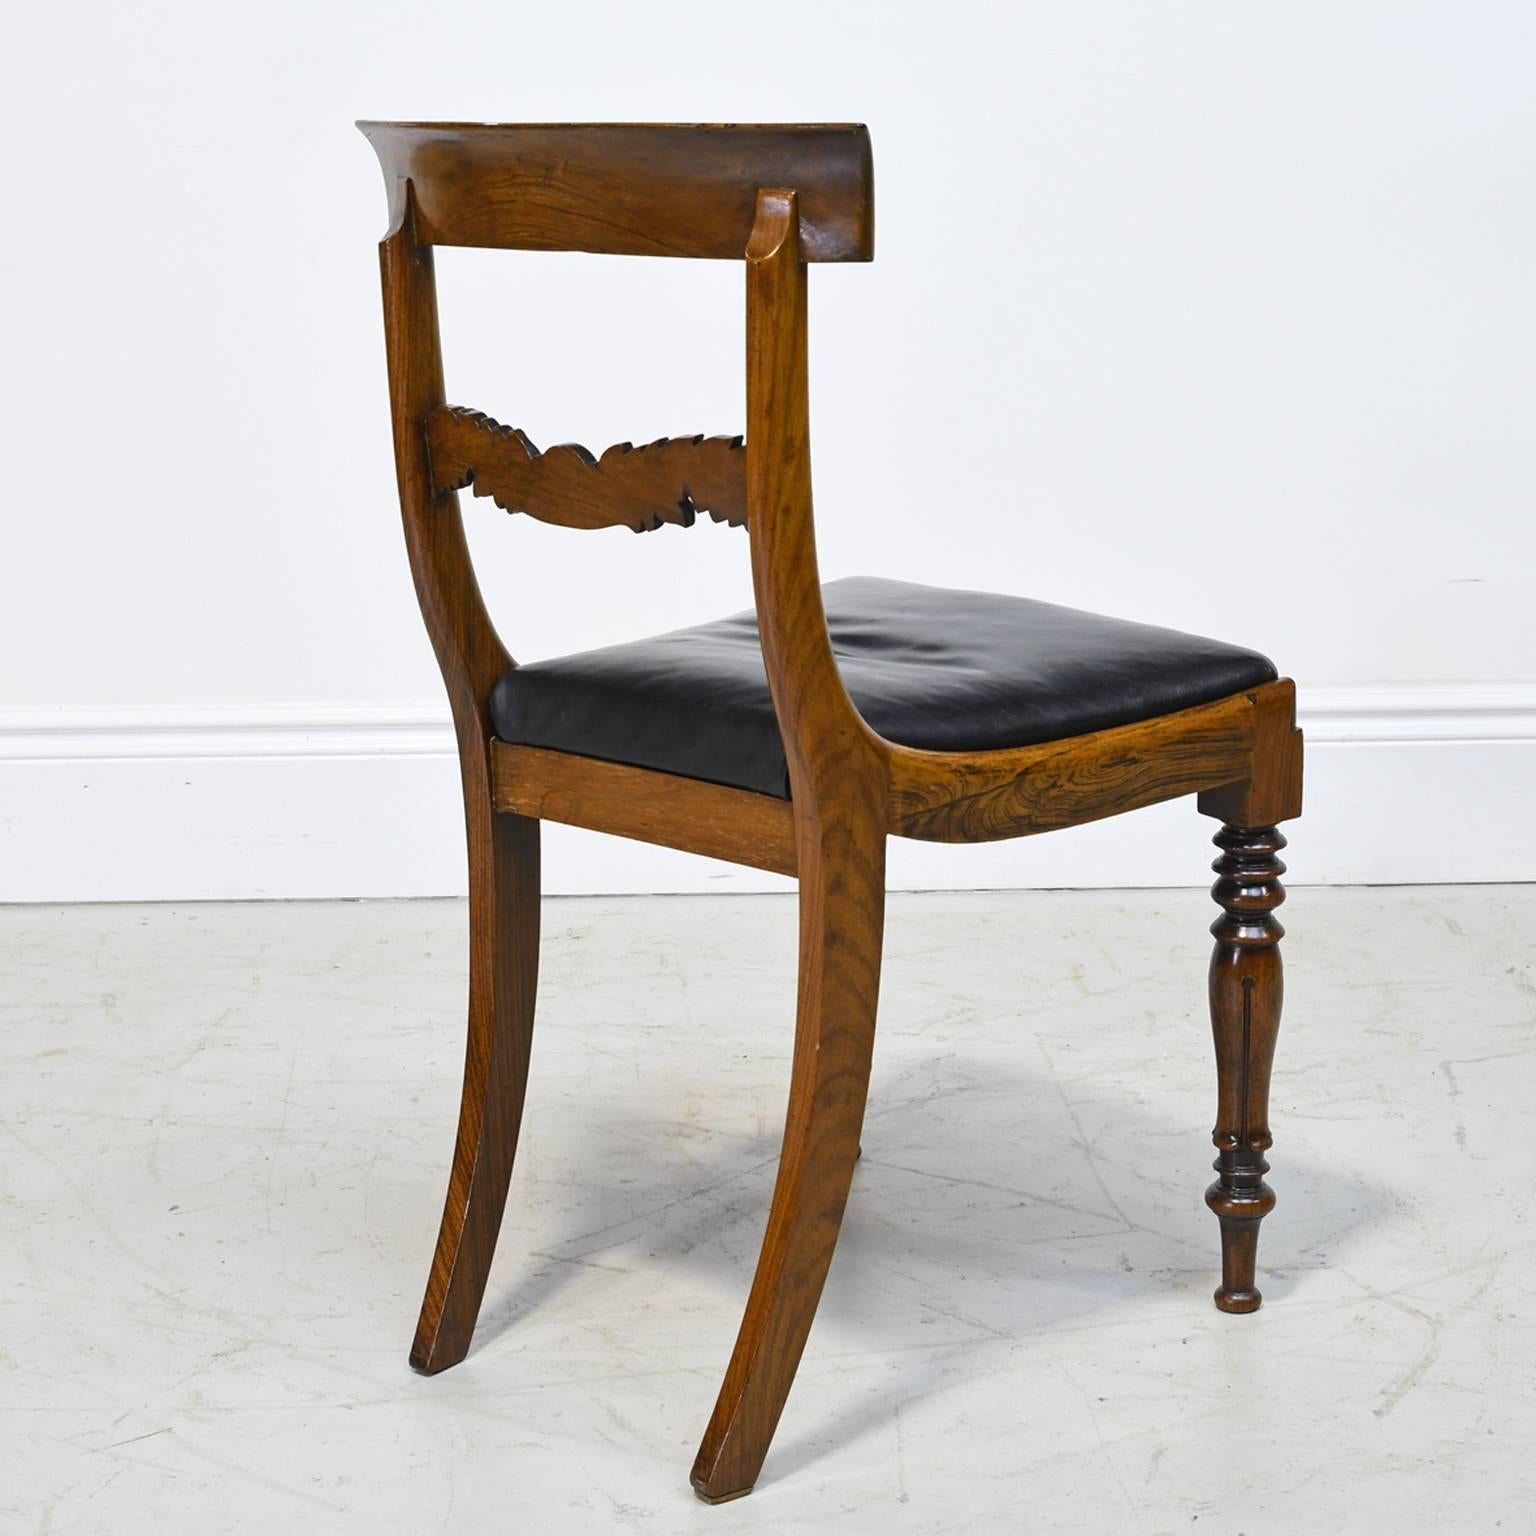 19th Century English Regency Rosewood Chair with Black Leather Upholstery, circa 1830